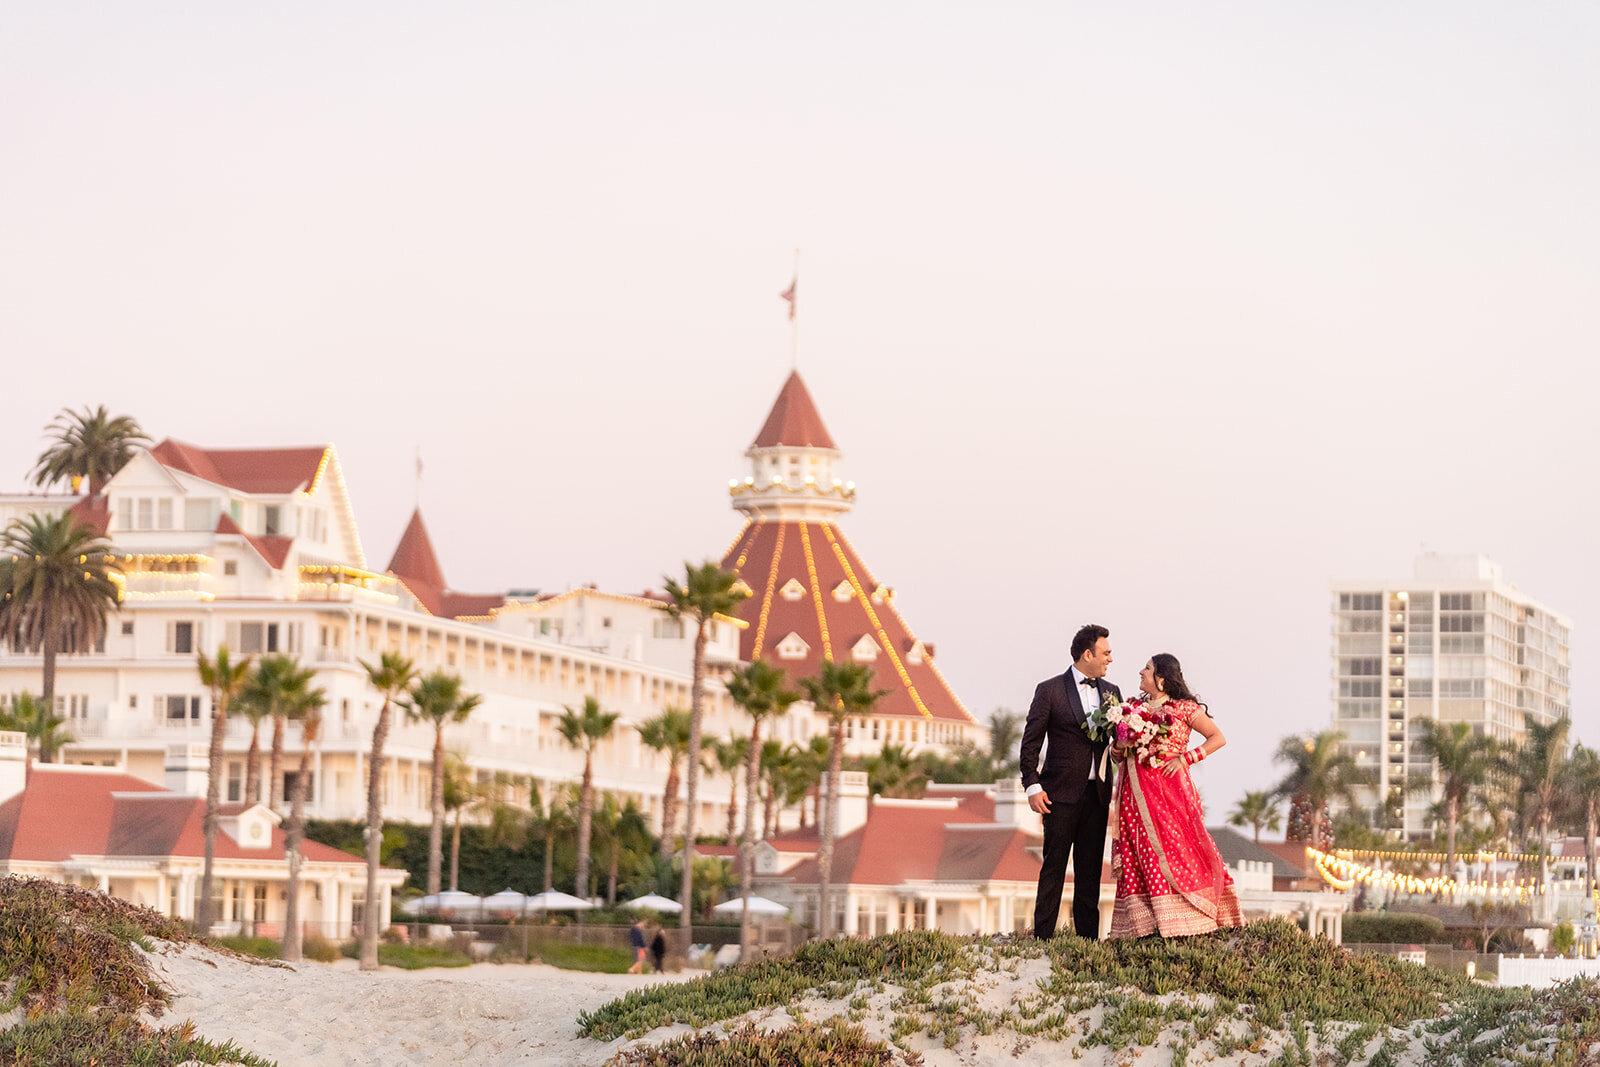 A groom in a black suit and a bride in a red and gold sari with the Iconic Hotel Del in the background